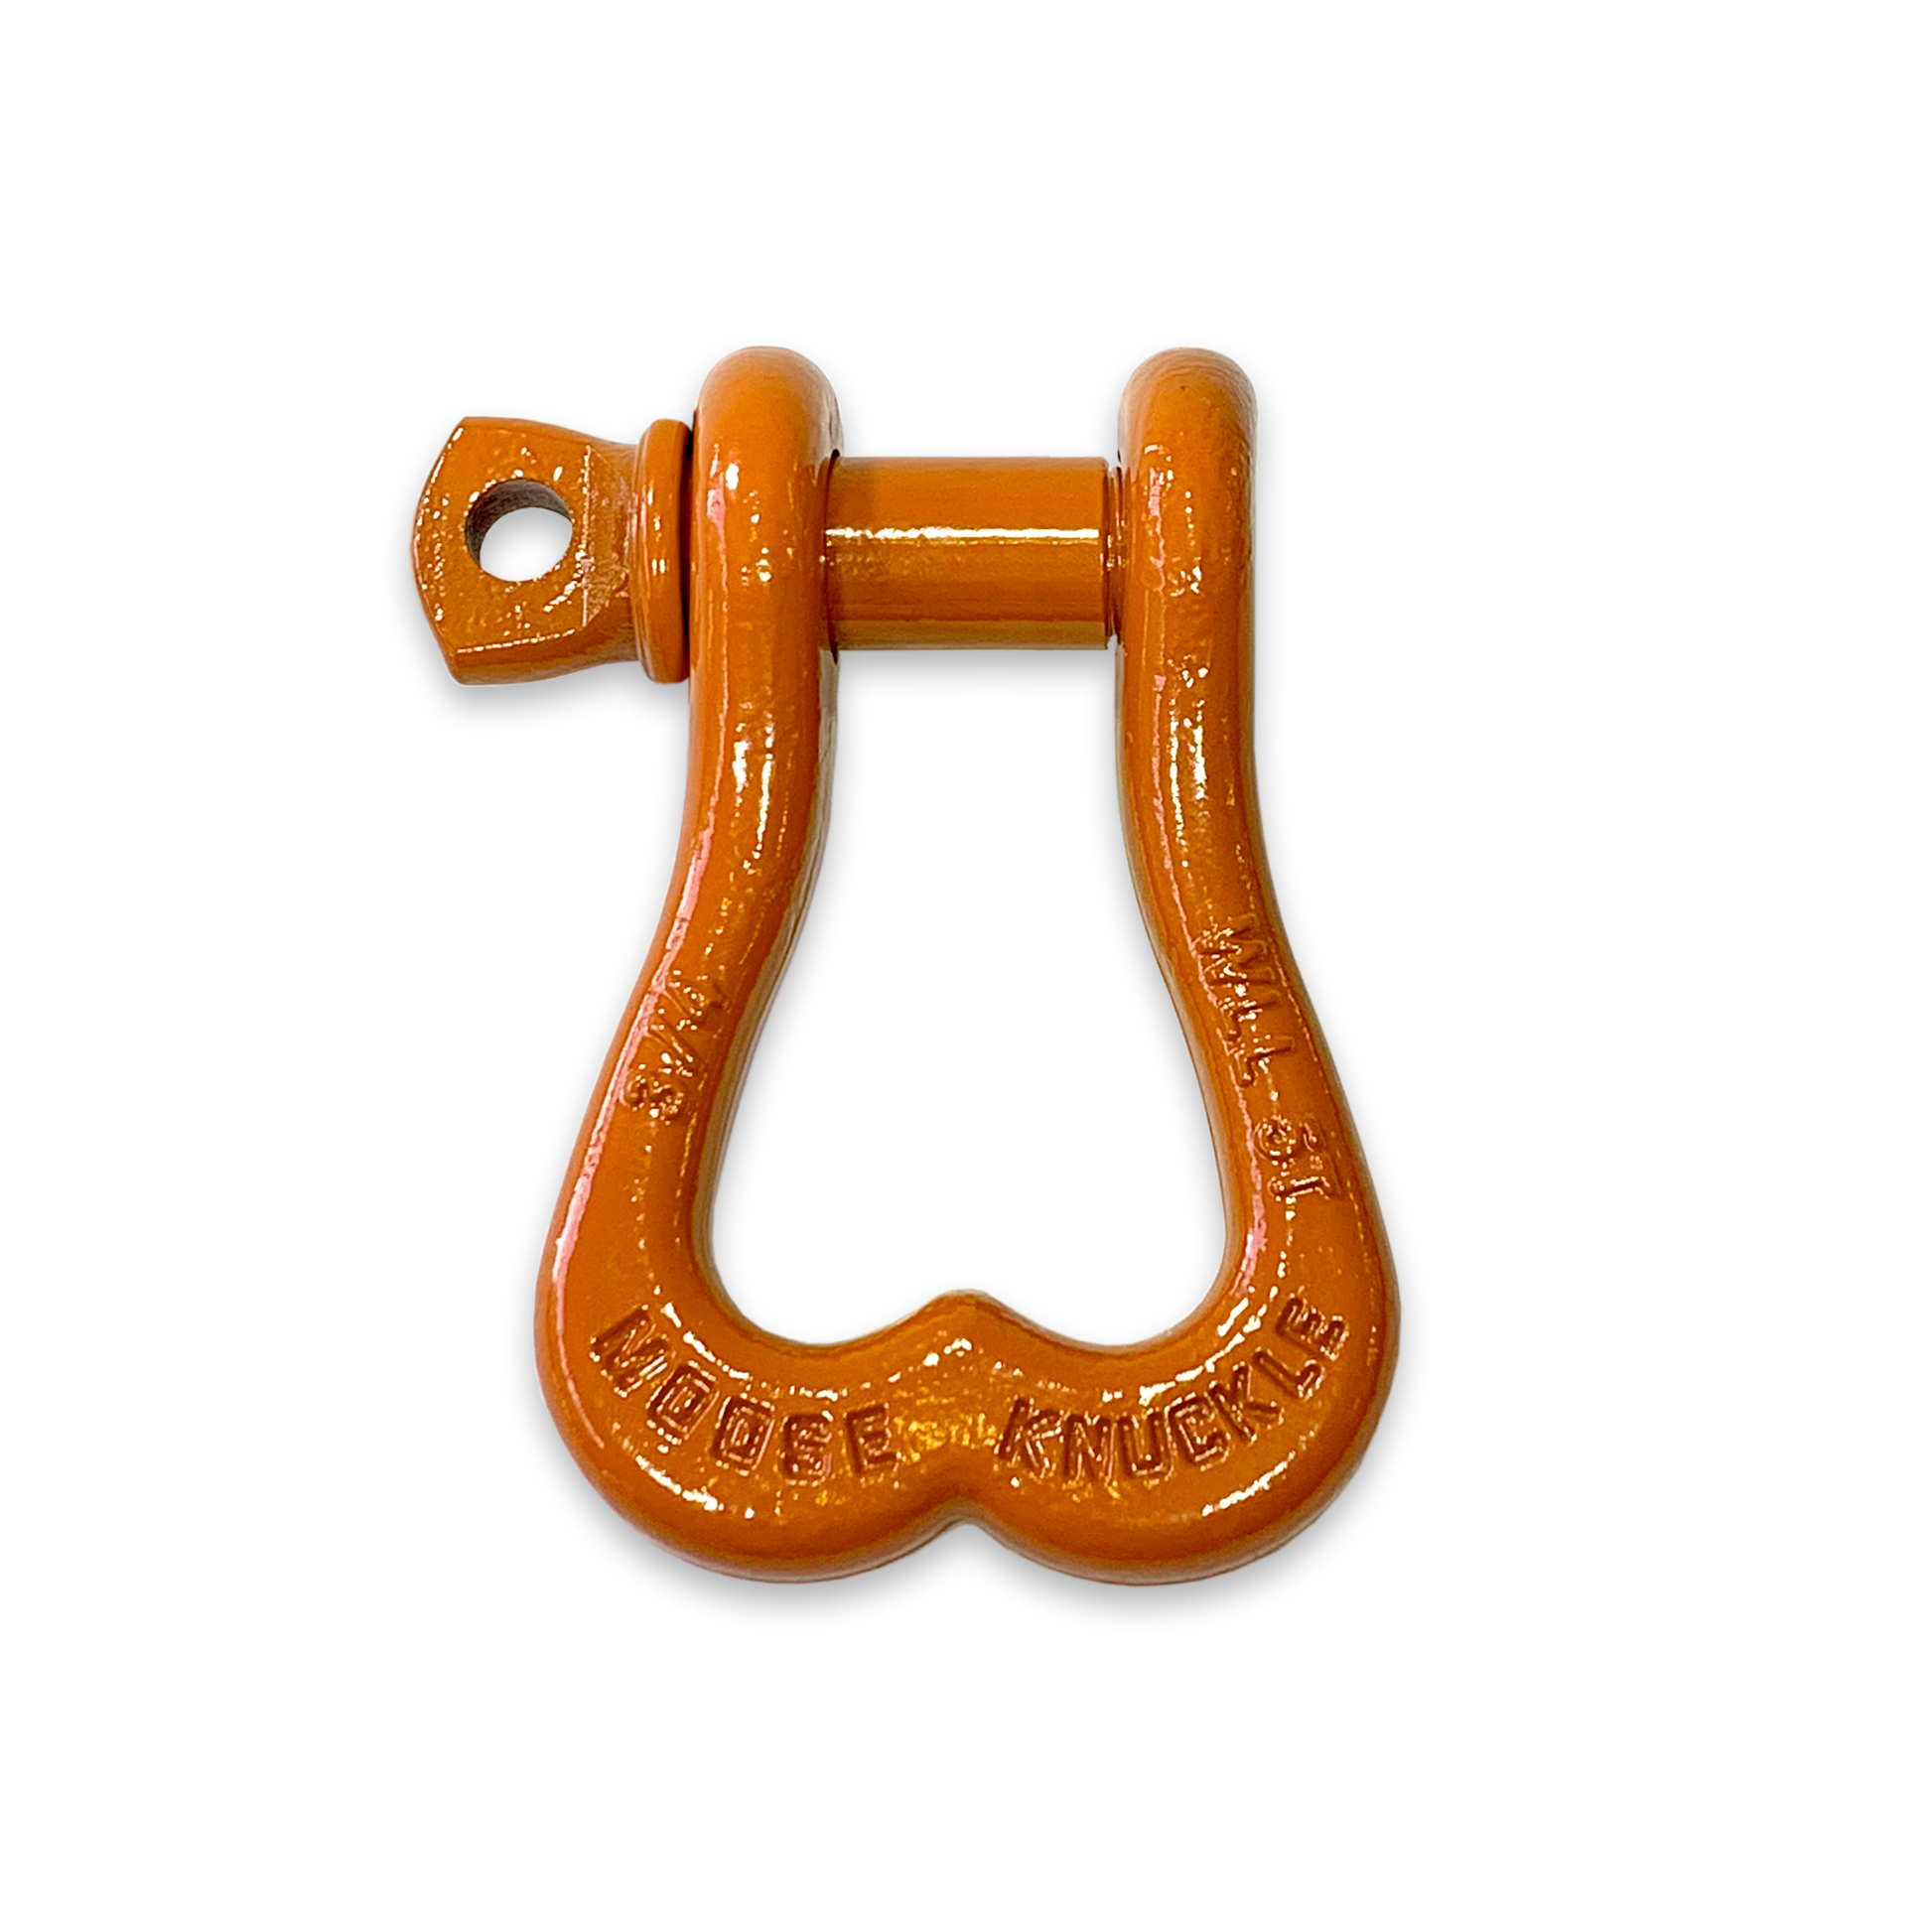 Moose Knuckle XL Obscene Orange D-Ring 3/4" Shackle for Towing Off-Road Jeep, Tacoma, 4-Runner, 4x4 Truck and SxS Vehicle Recovery